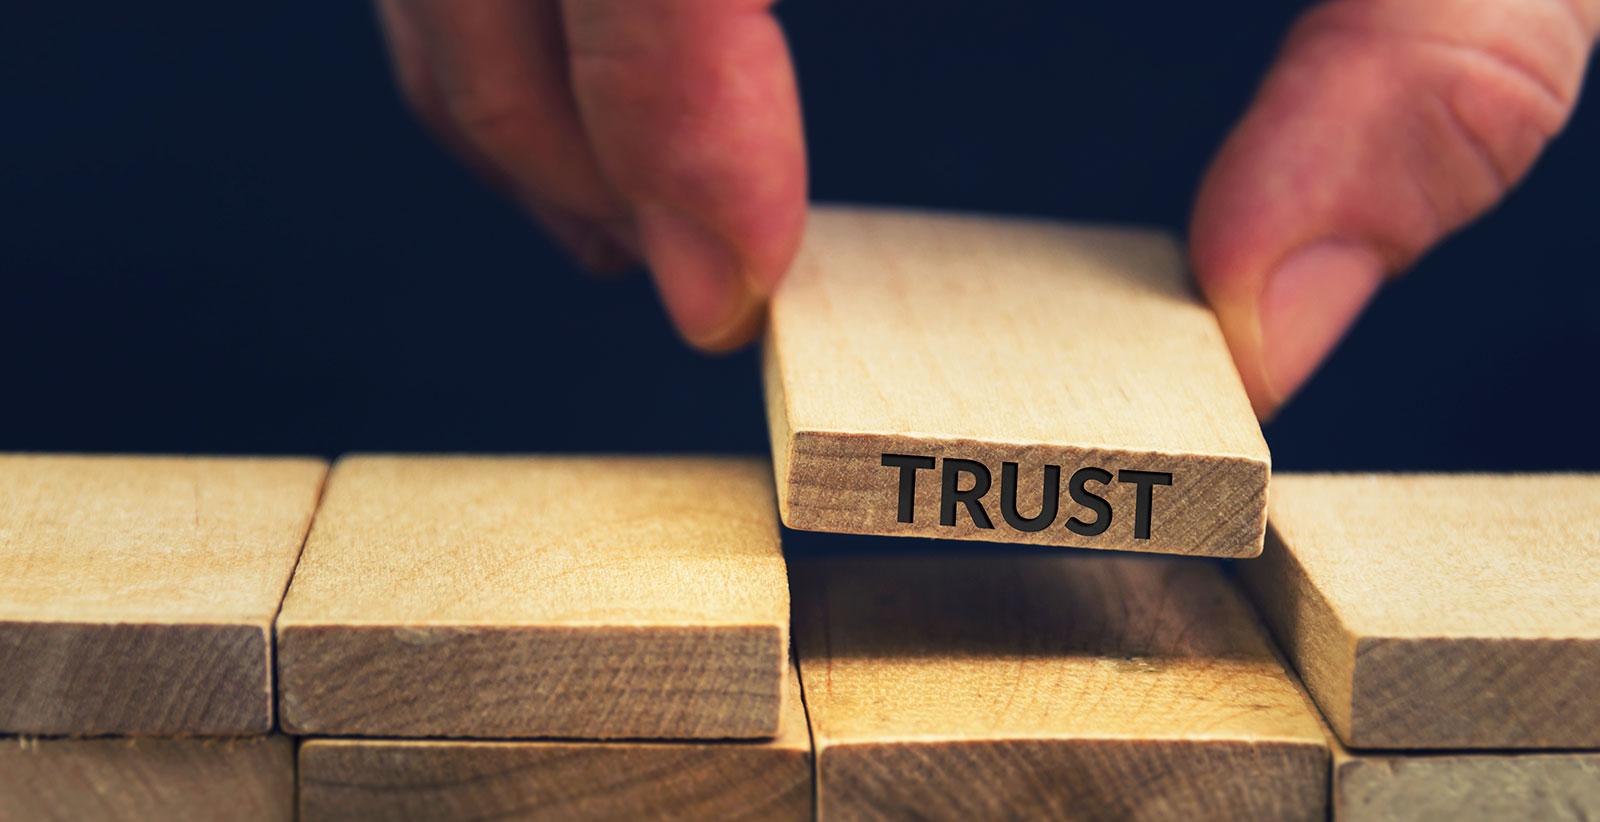 image of someone picking up wooden block with the word "trust" written on the side